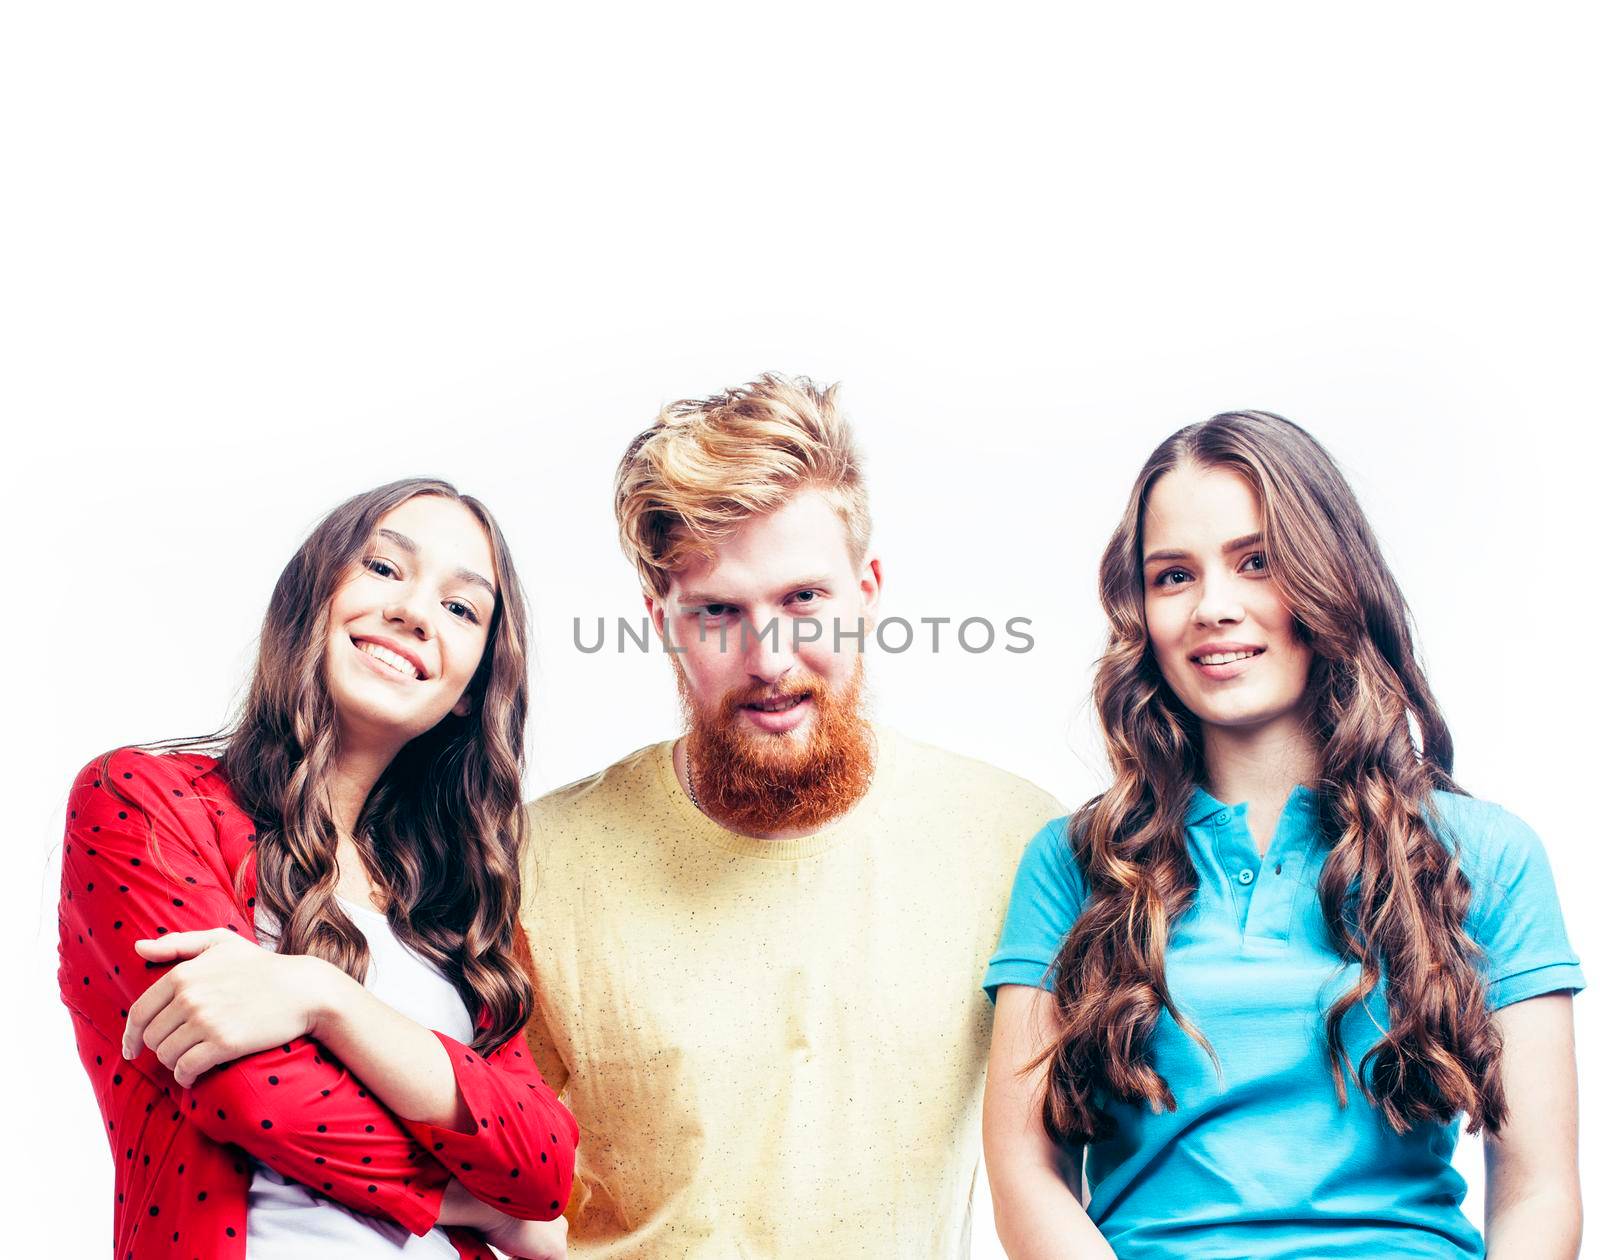 company of hipster guys, bearded red hair boy and girls students having fun together friends, diverse fashion style, lifestyle people concept isolated on white background by JordanJ